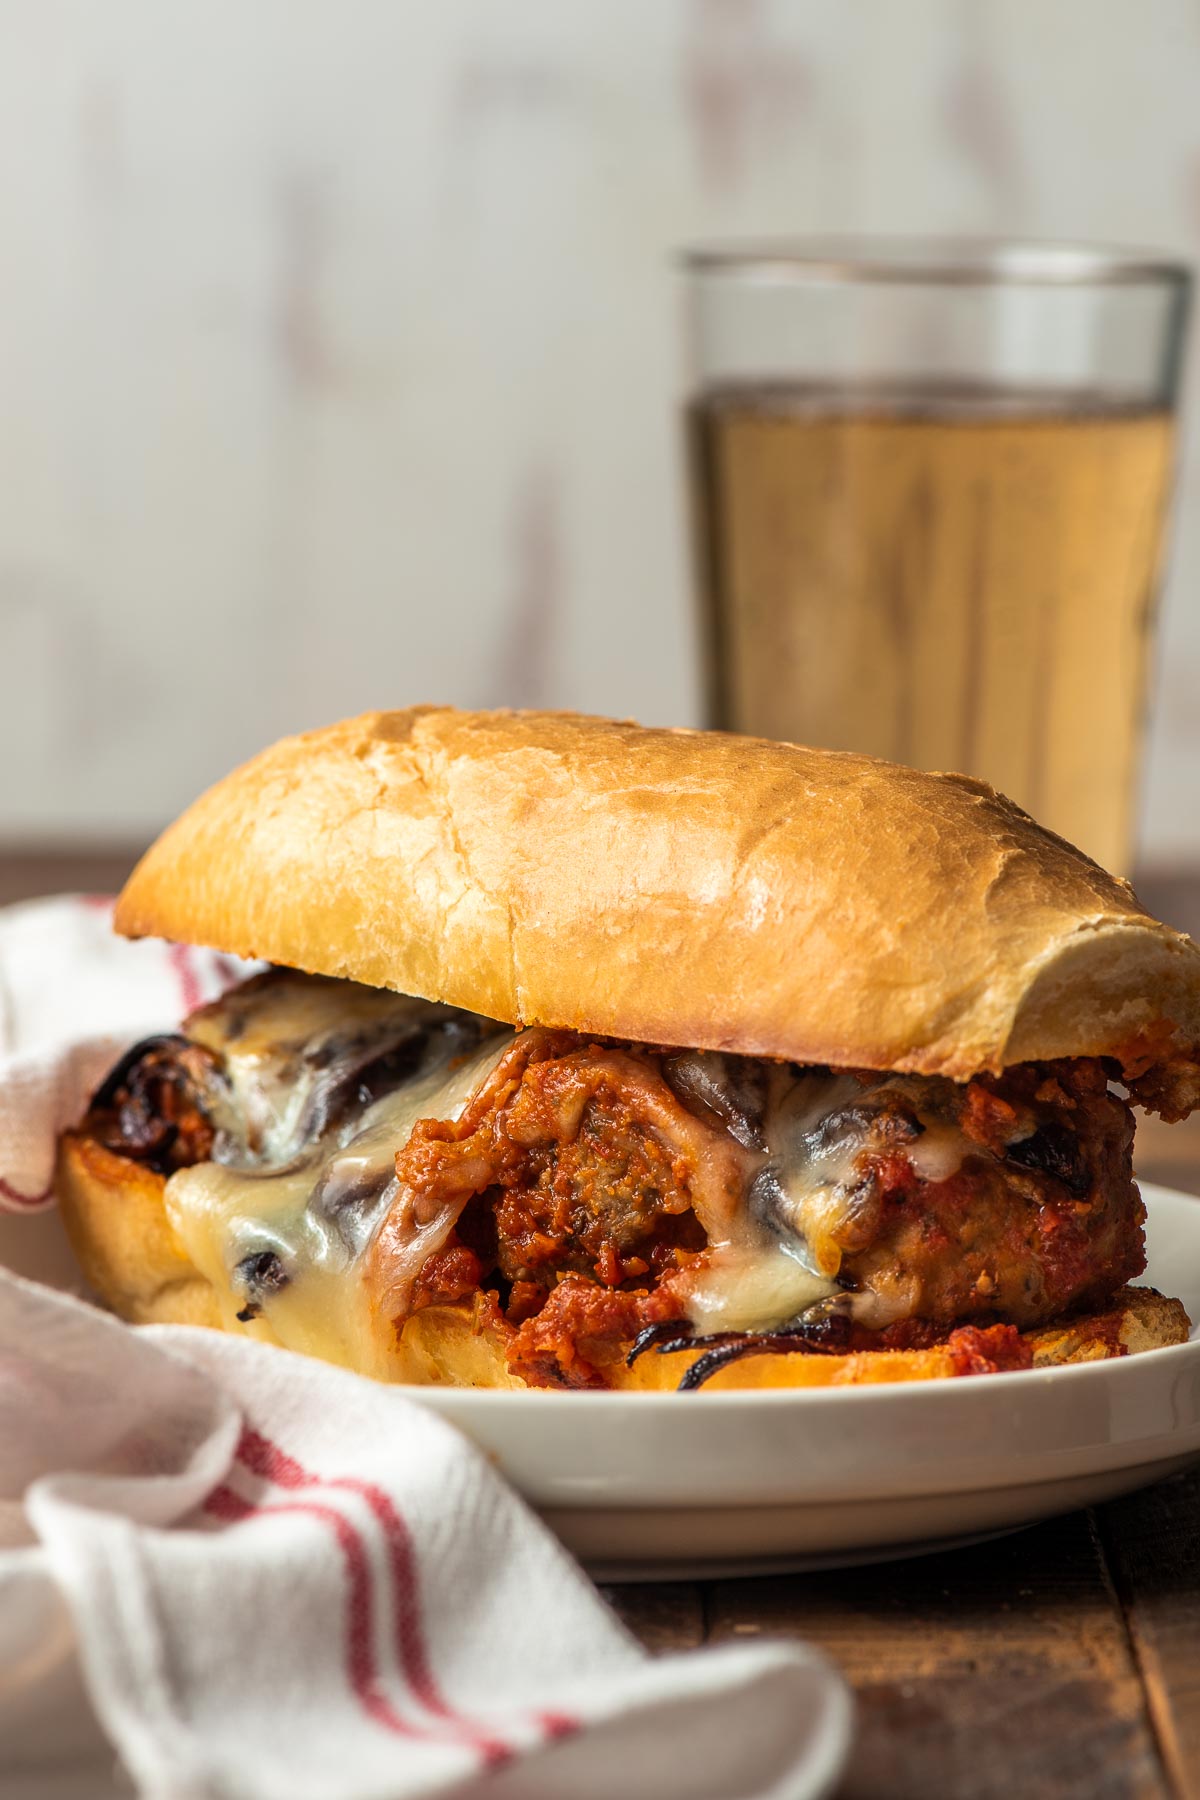 A saucy meatball sub served with a beer.